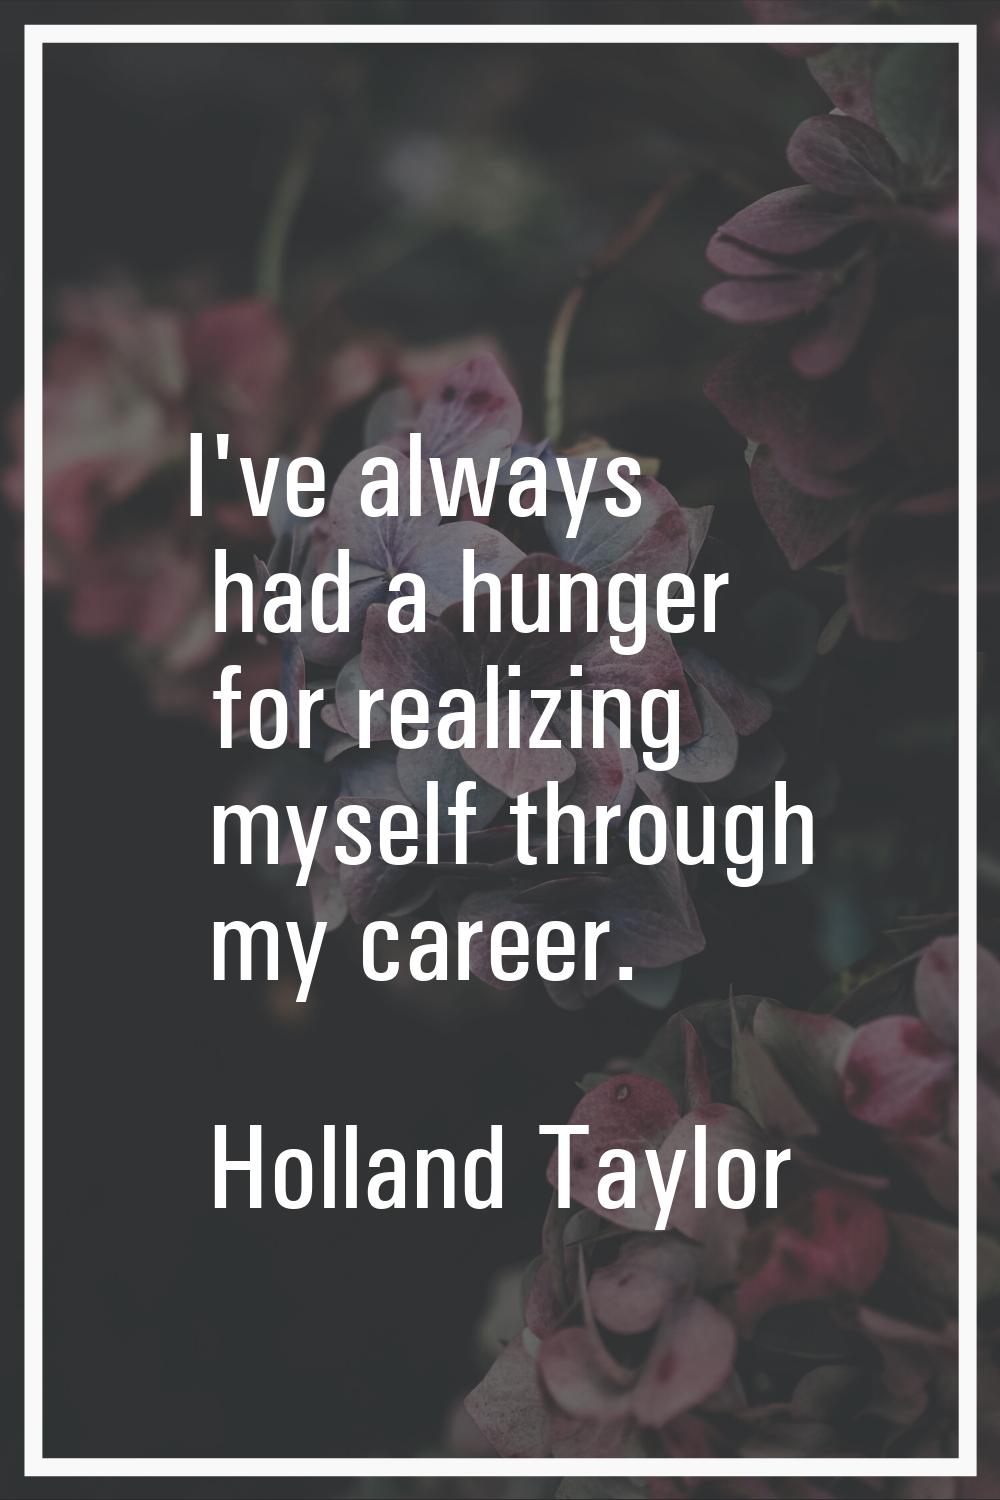 I've always had a hunger for realizing myself through my career.